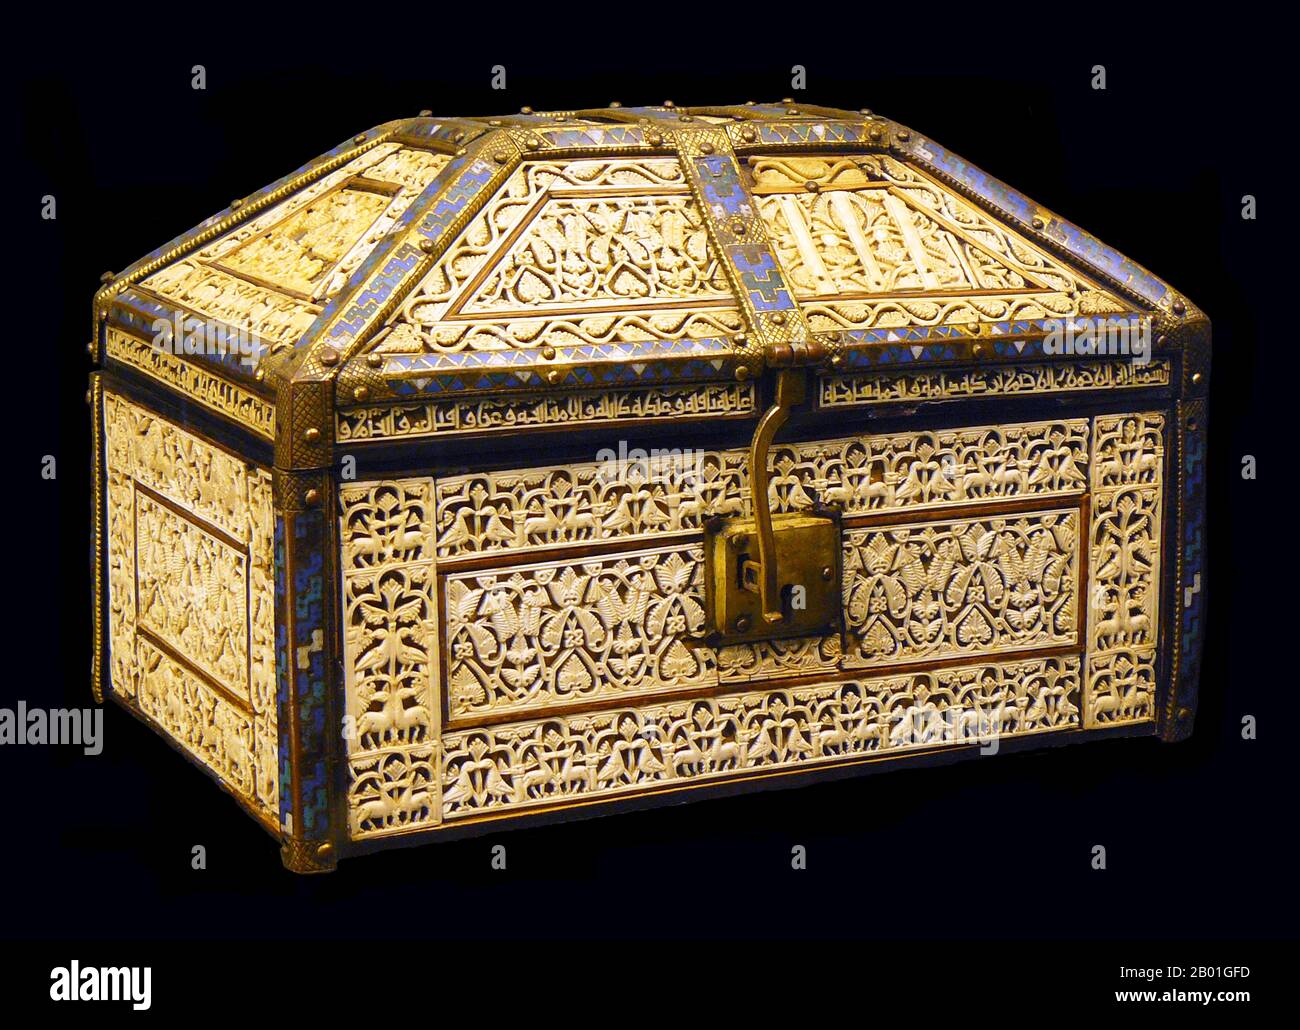 Spain/Al-Andalus: The Casket of Palencia by Abd-ar-Rahman ibn Zeyyah, 11th century, formerly in the Treasury of the Cathedral of Palencia. Photo by Luis Garcia (CC BY-SA 3.0 License).  Al-Andalus was the Arabic name given to a nation and territorial region also commonly referred to as Moorish Iberia. The name describes parts of the Iberian Peninsula and Septimania governed by Muslims (often given the generic name of Moors), at various times in the period between 711 and 1492, although the territorial boundaries underwent constant changes due to wars with the Christian Kingdoms. Stock Photo